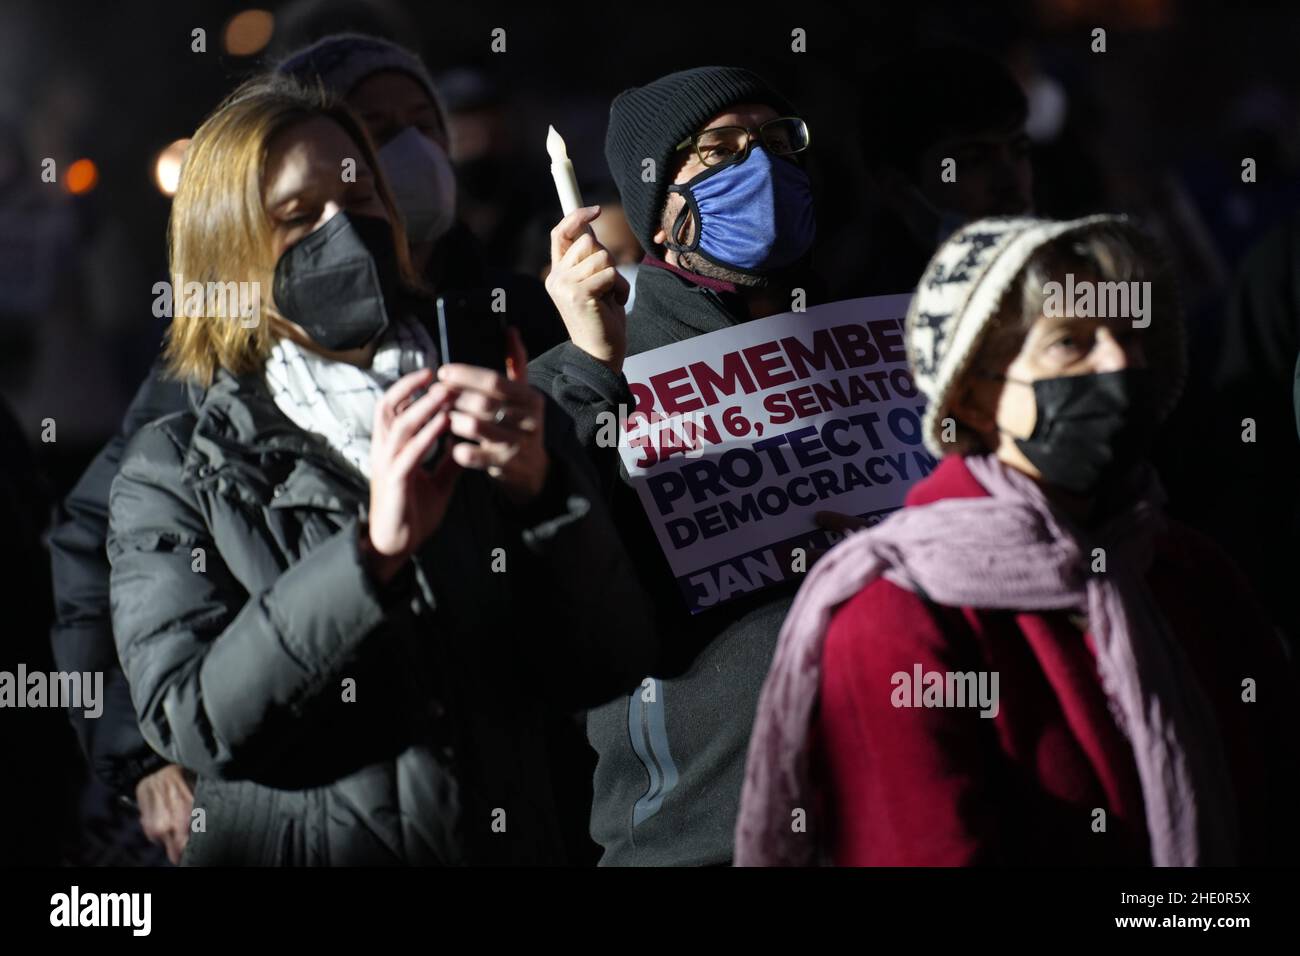 January 6, 2022, Washington, District of Columbia, United States: The January 6, 2022, Vigil for Democracy and voter registration event near the U.S. Capitol commemorating the insurrection of January 6, 2021. (Credit Image: © Gregg Brekke/ZUMA Press Wire) Stock Photo